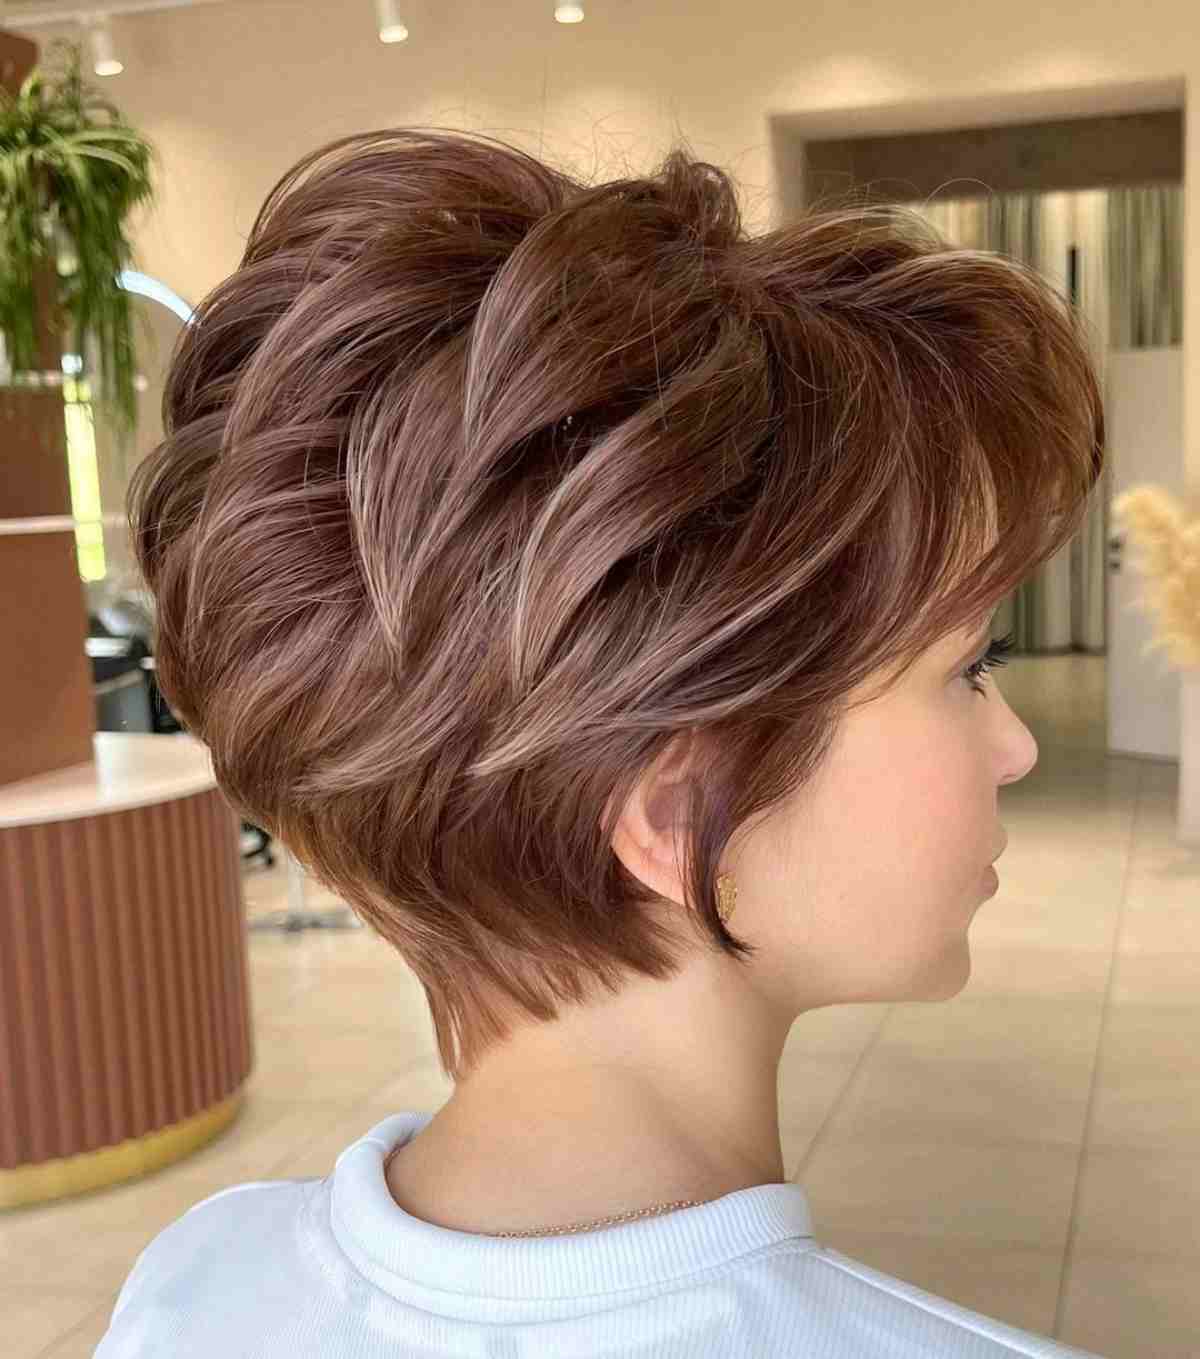 Short Layered Pixie with Highlights